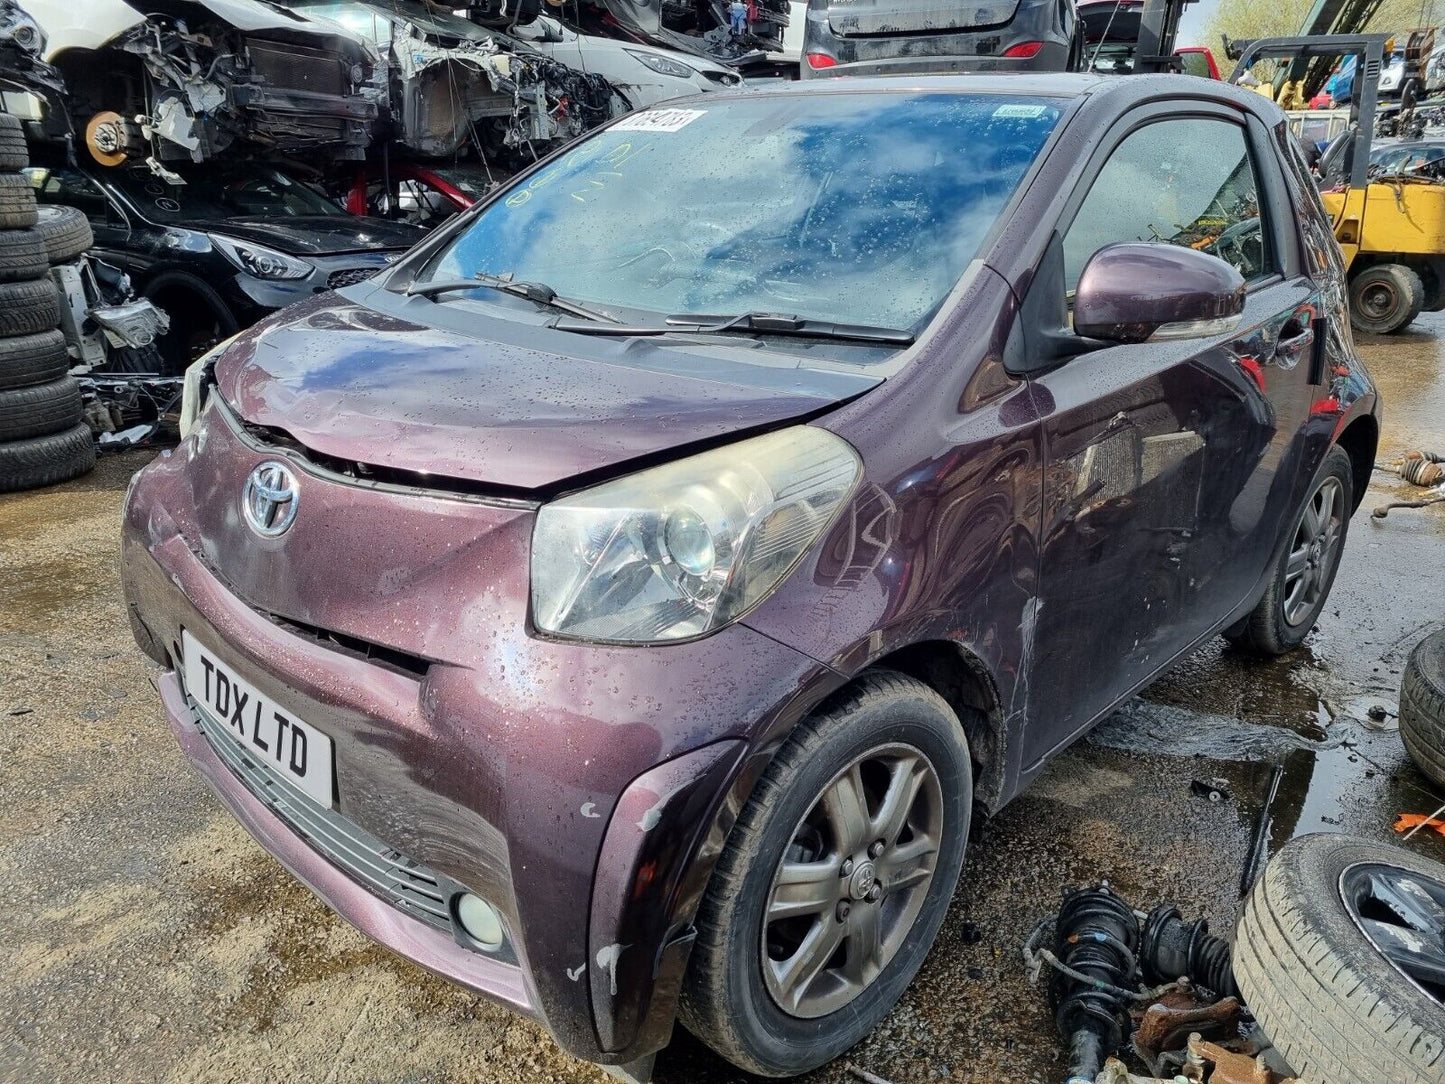 2011 TOYOTA IQ MK1 3DR HATCH 1.0 PETROL 5 SPEED MANUAL VEHICLE FOR BREAKING